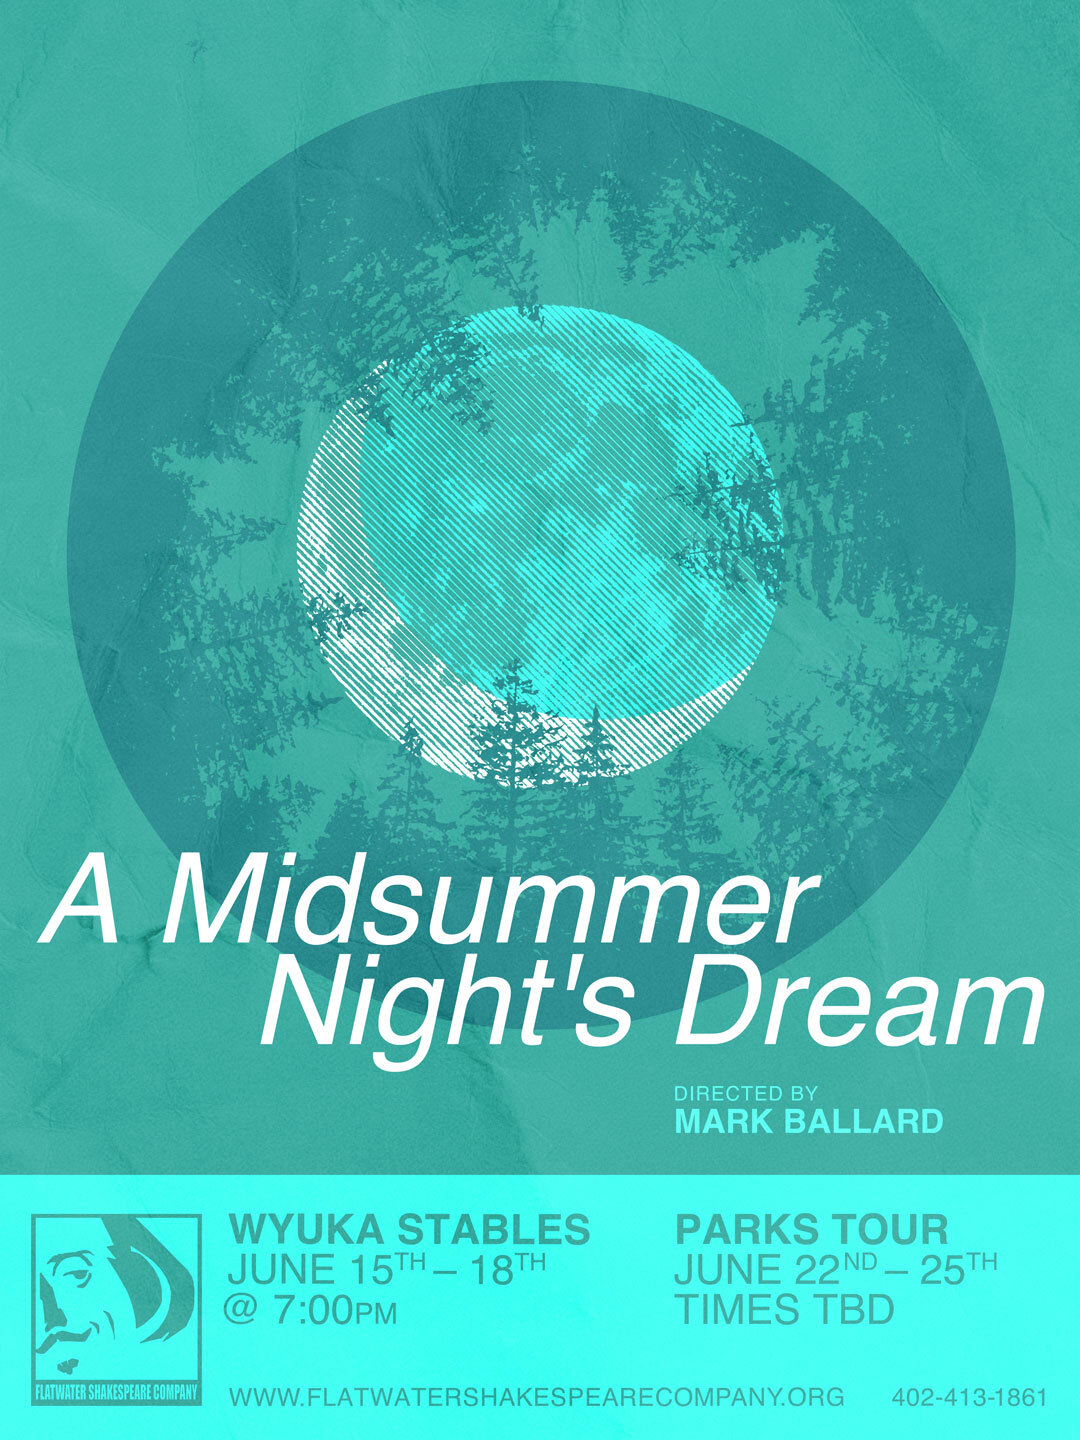 6/16 KID - KIDS (10 and Under): Friday. June 16, 2023 | 7:00 p.m. - 9:00 p.m. CST | Wyuka Stables (A Midsummer Night's Dream)